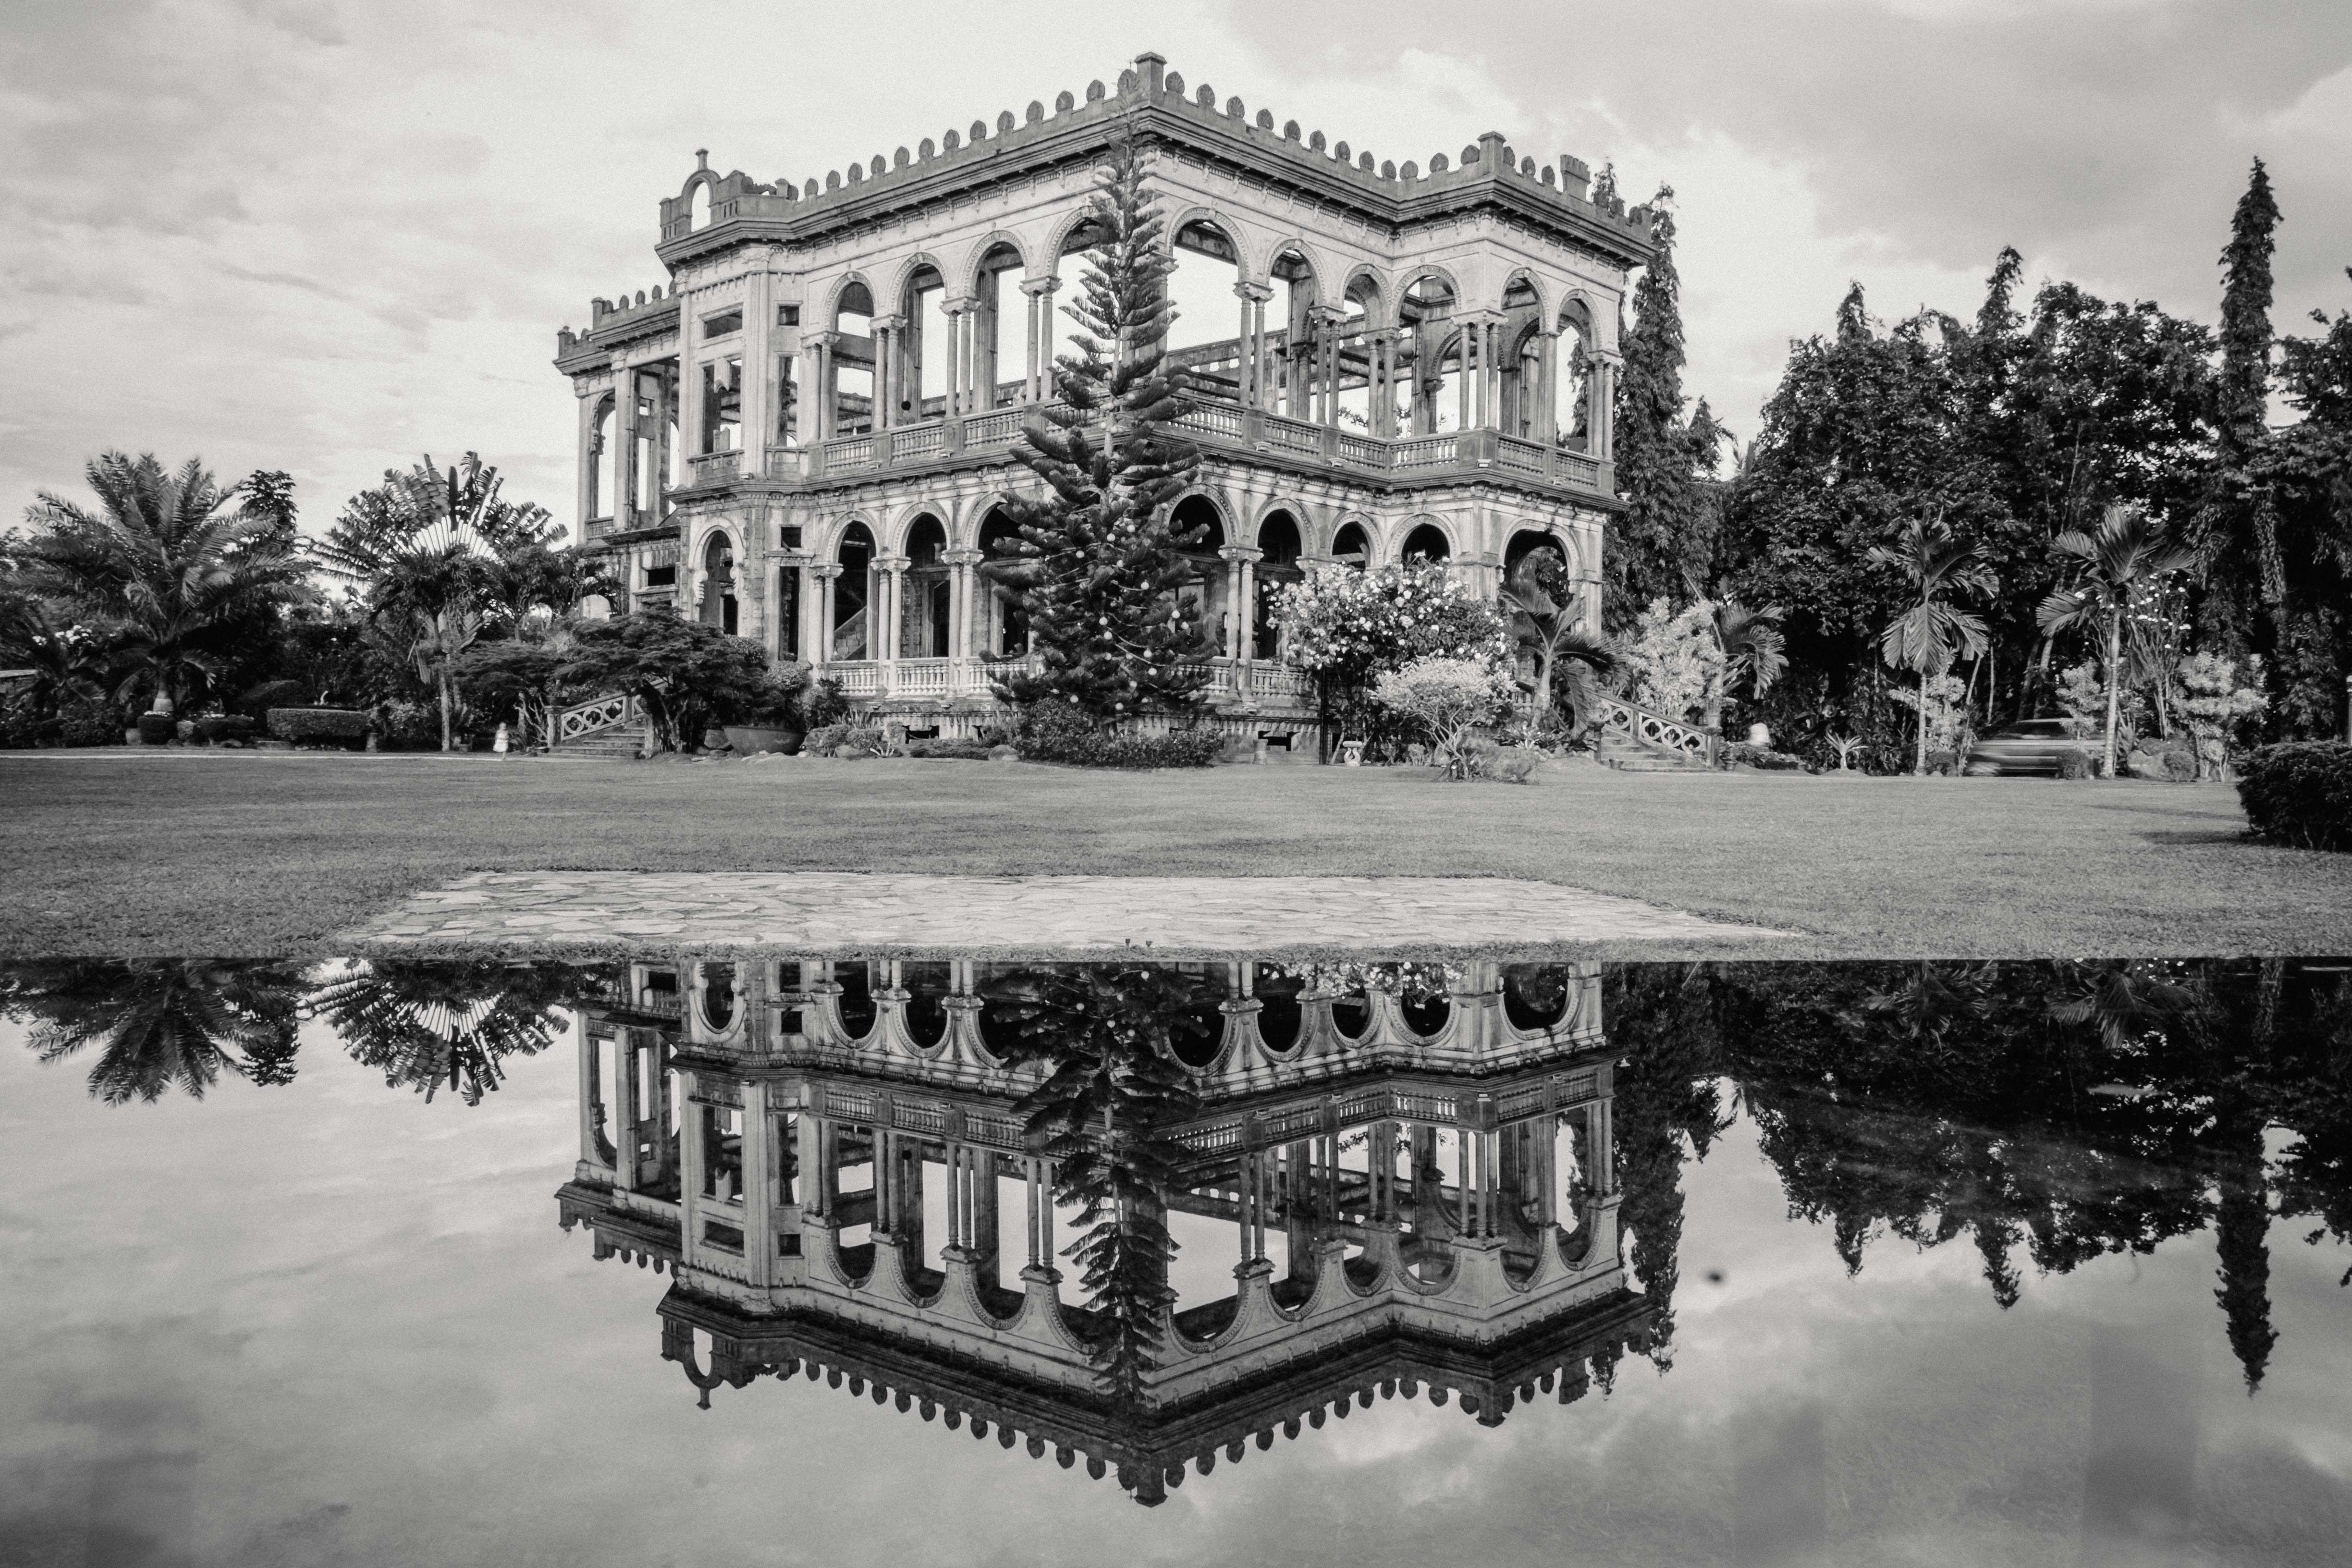 architecture, Monochrome, Building, Philippines, Palm trees, Trees, Ruin, Water, Grass, Field, Reflection, Stairs, Abandoned, Clouds, Sky, Arch, Jungles Wallpaper